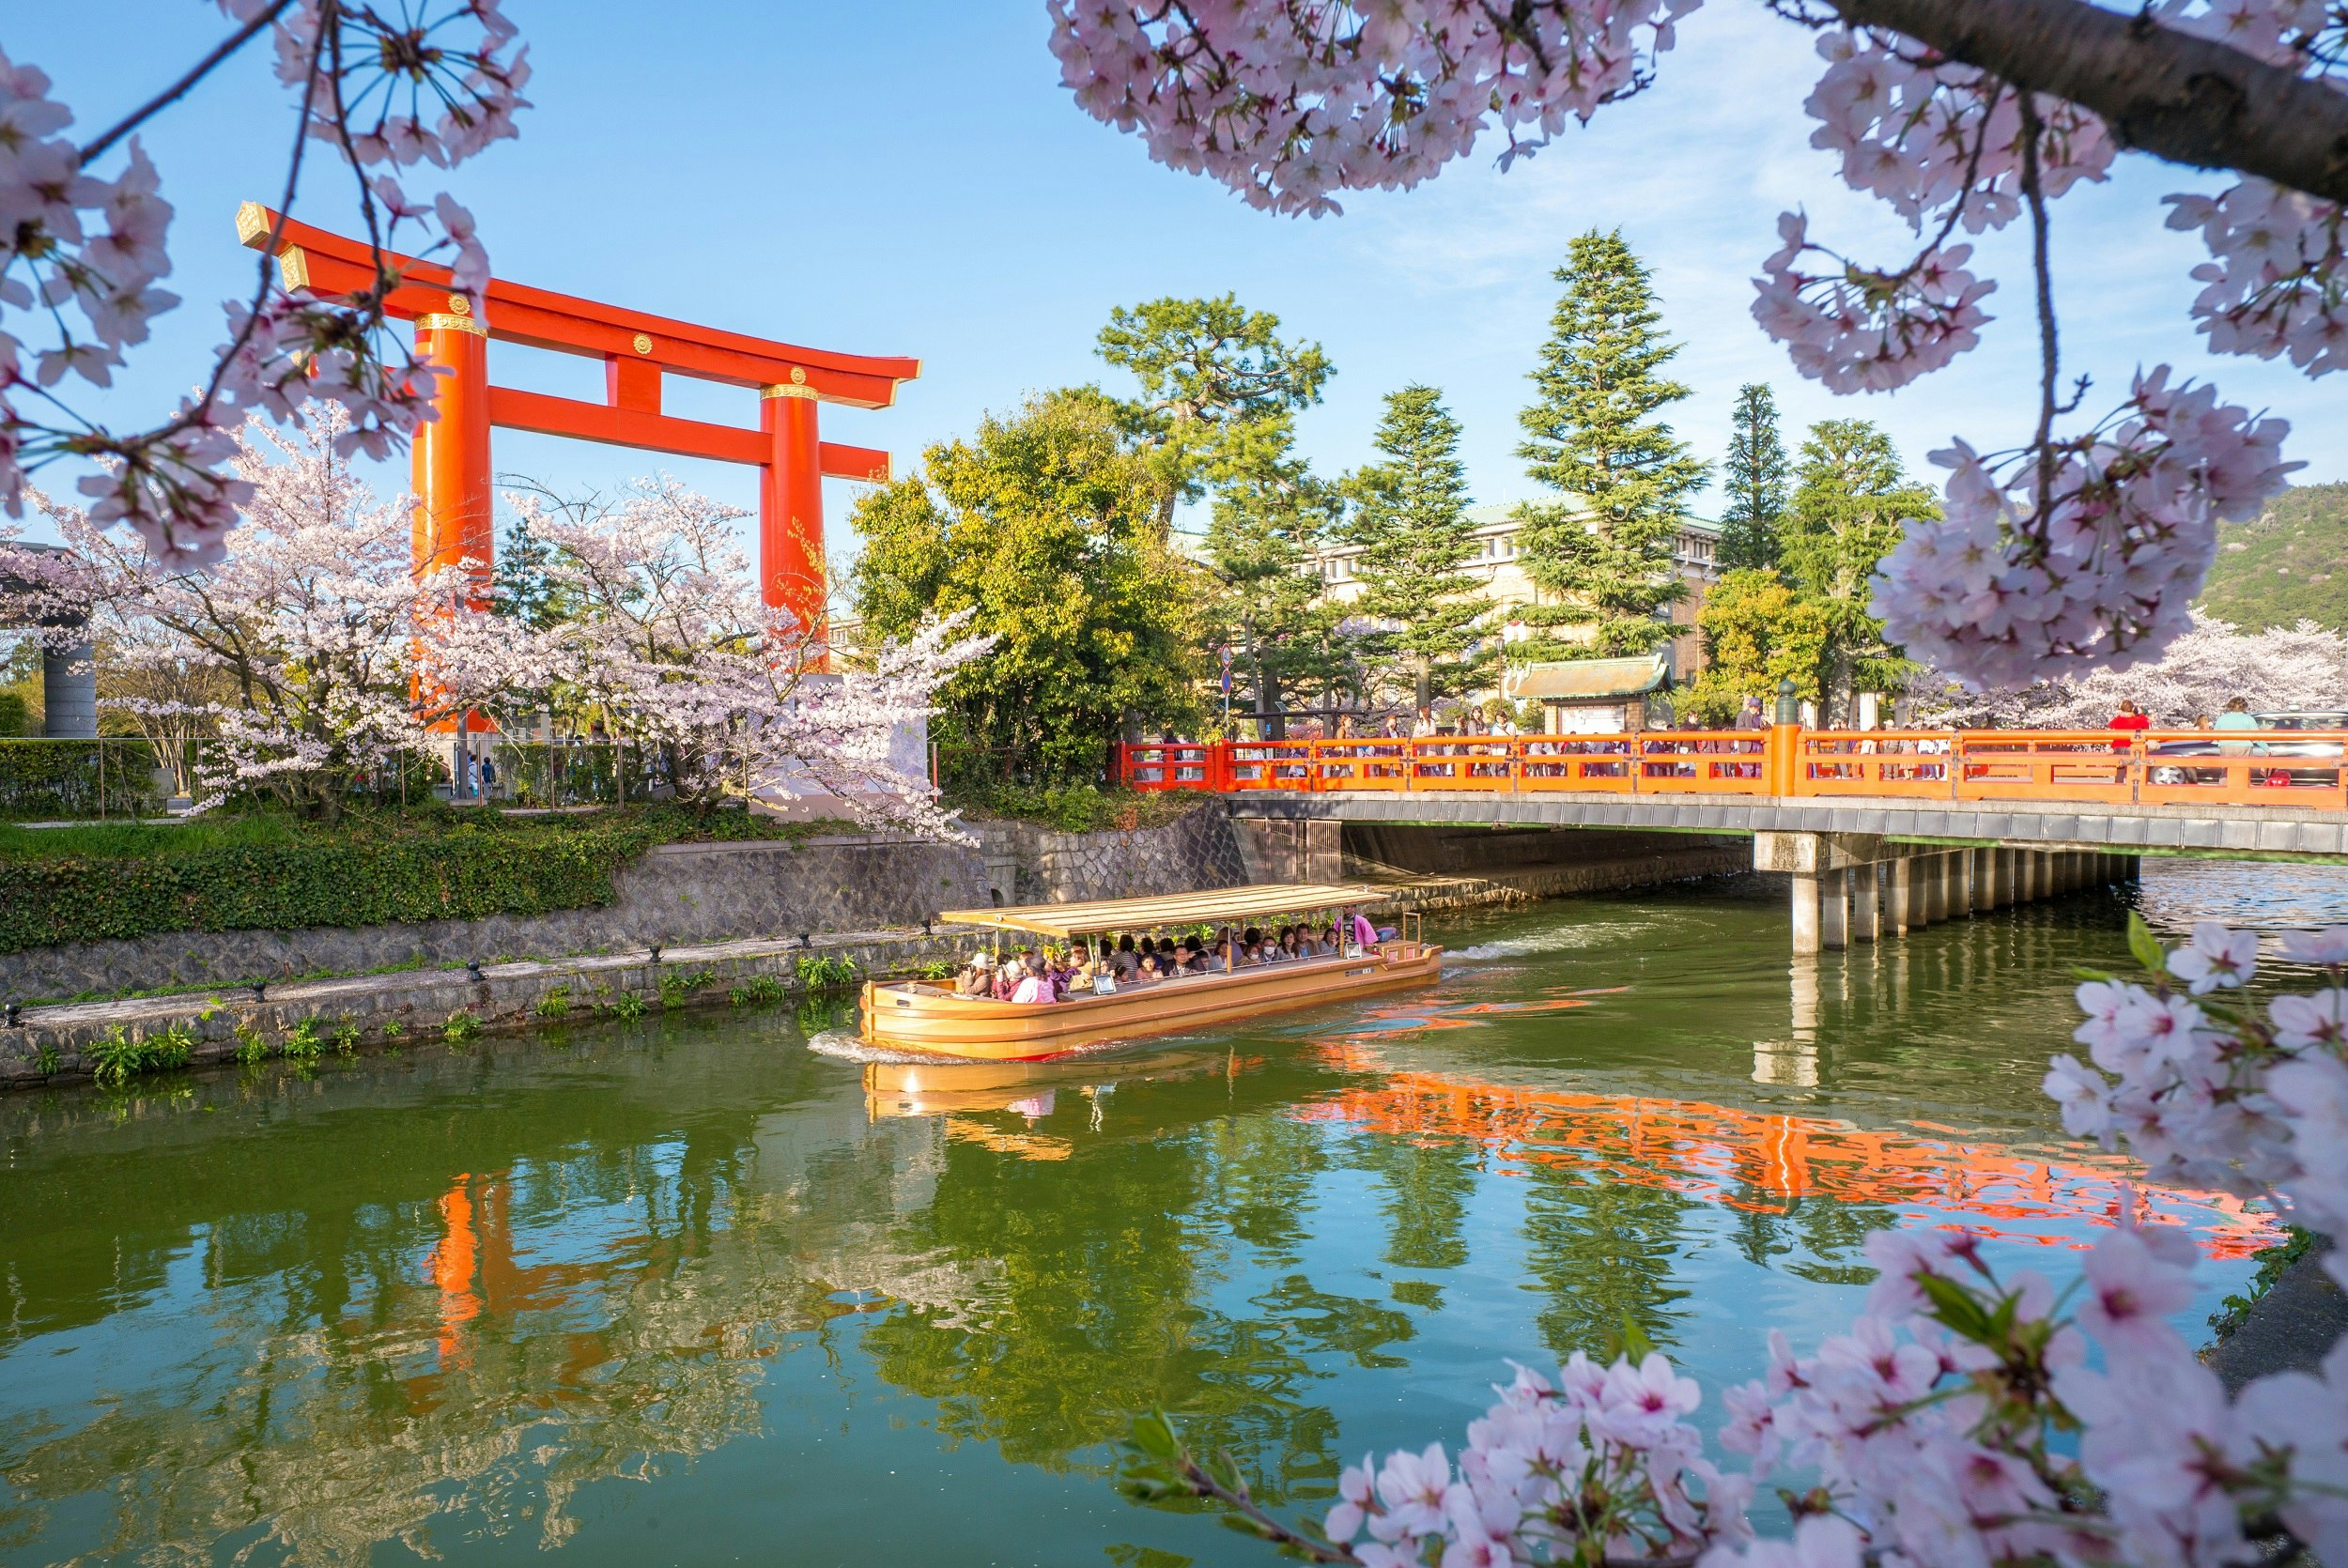 A tour boat sails down the canal past the Heian Shrine lined with cherry blossom and other trees in Kyoto on a sunny day